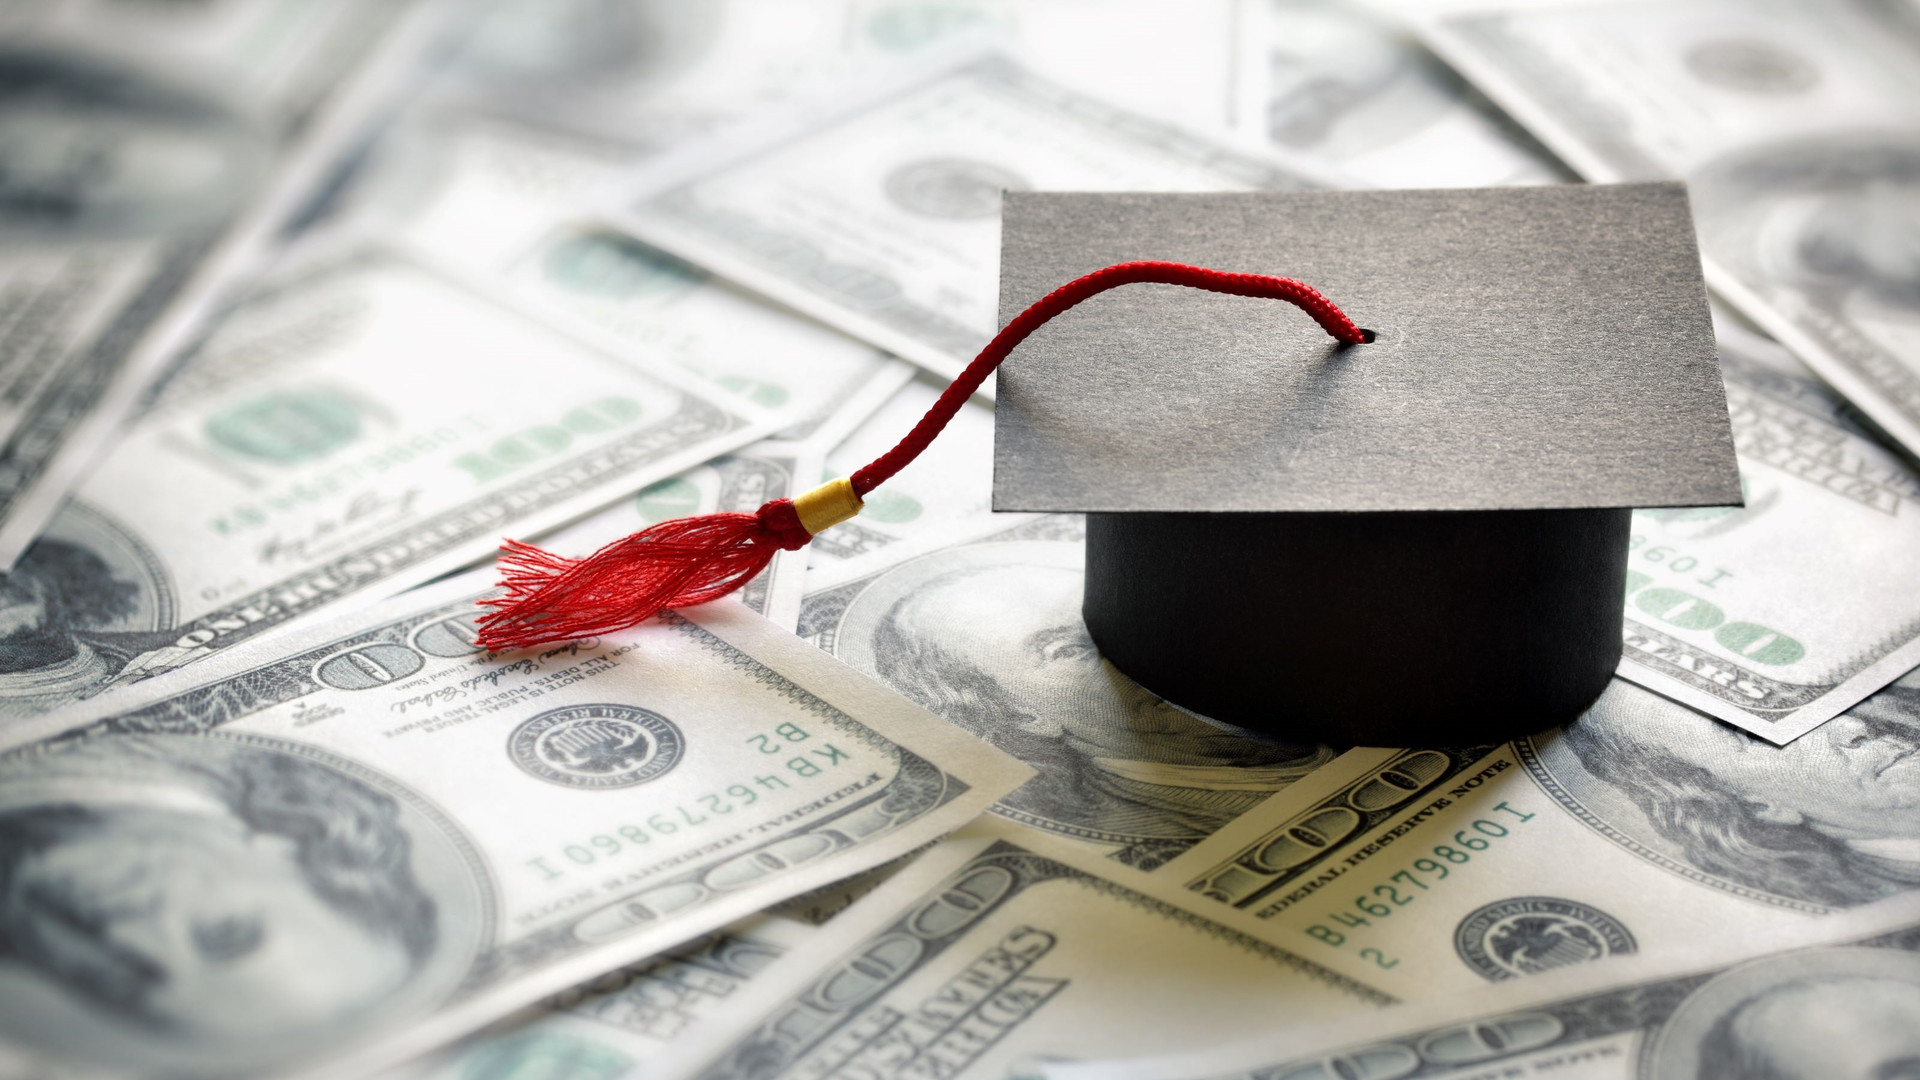 Should Paying Off Student Loans Be a Priority? What to Consider